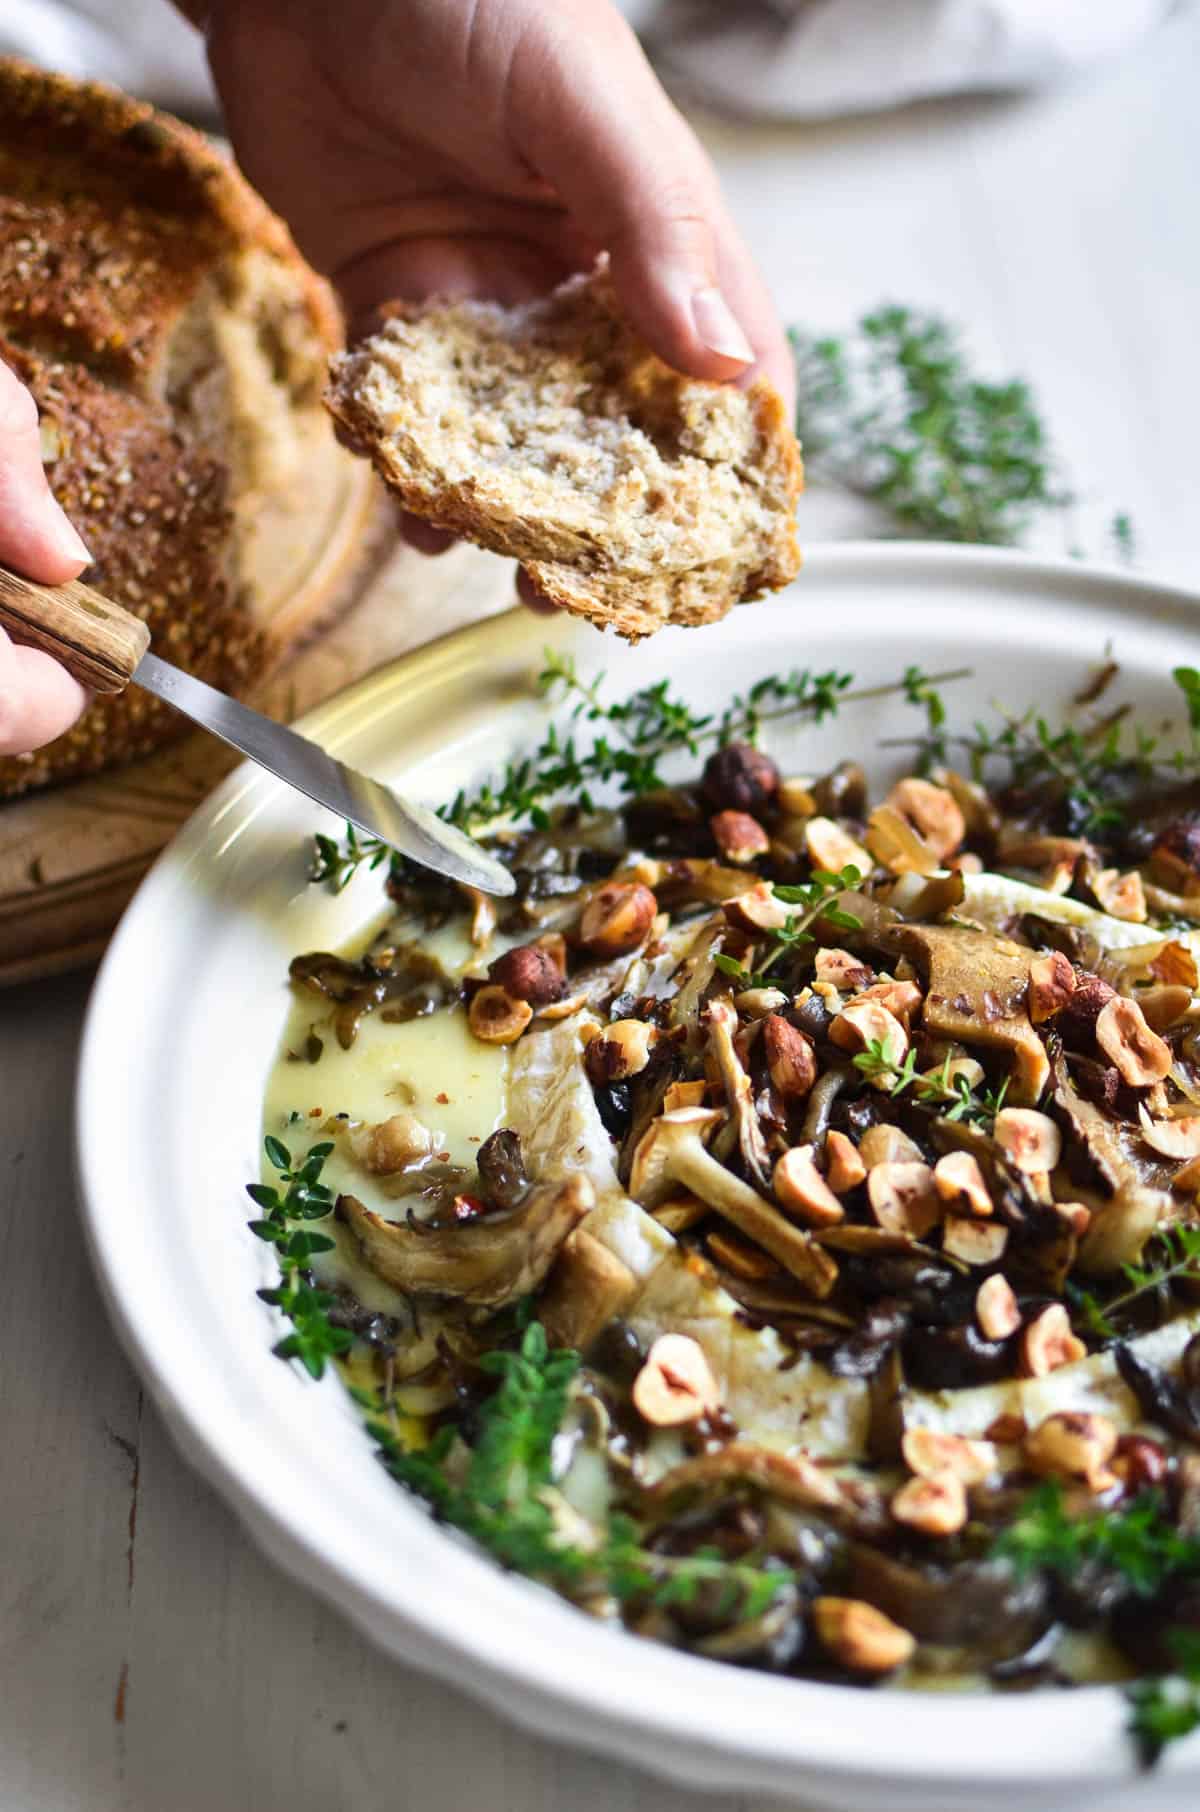 Wild mushroom and baked melted brie in a bowl.